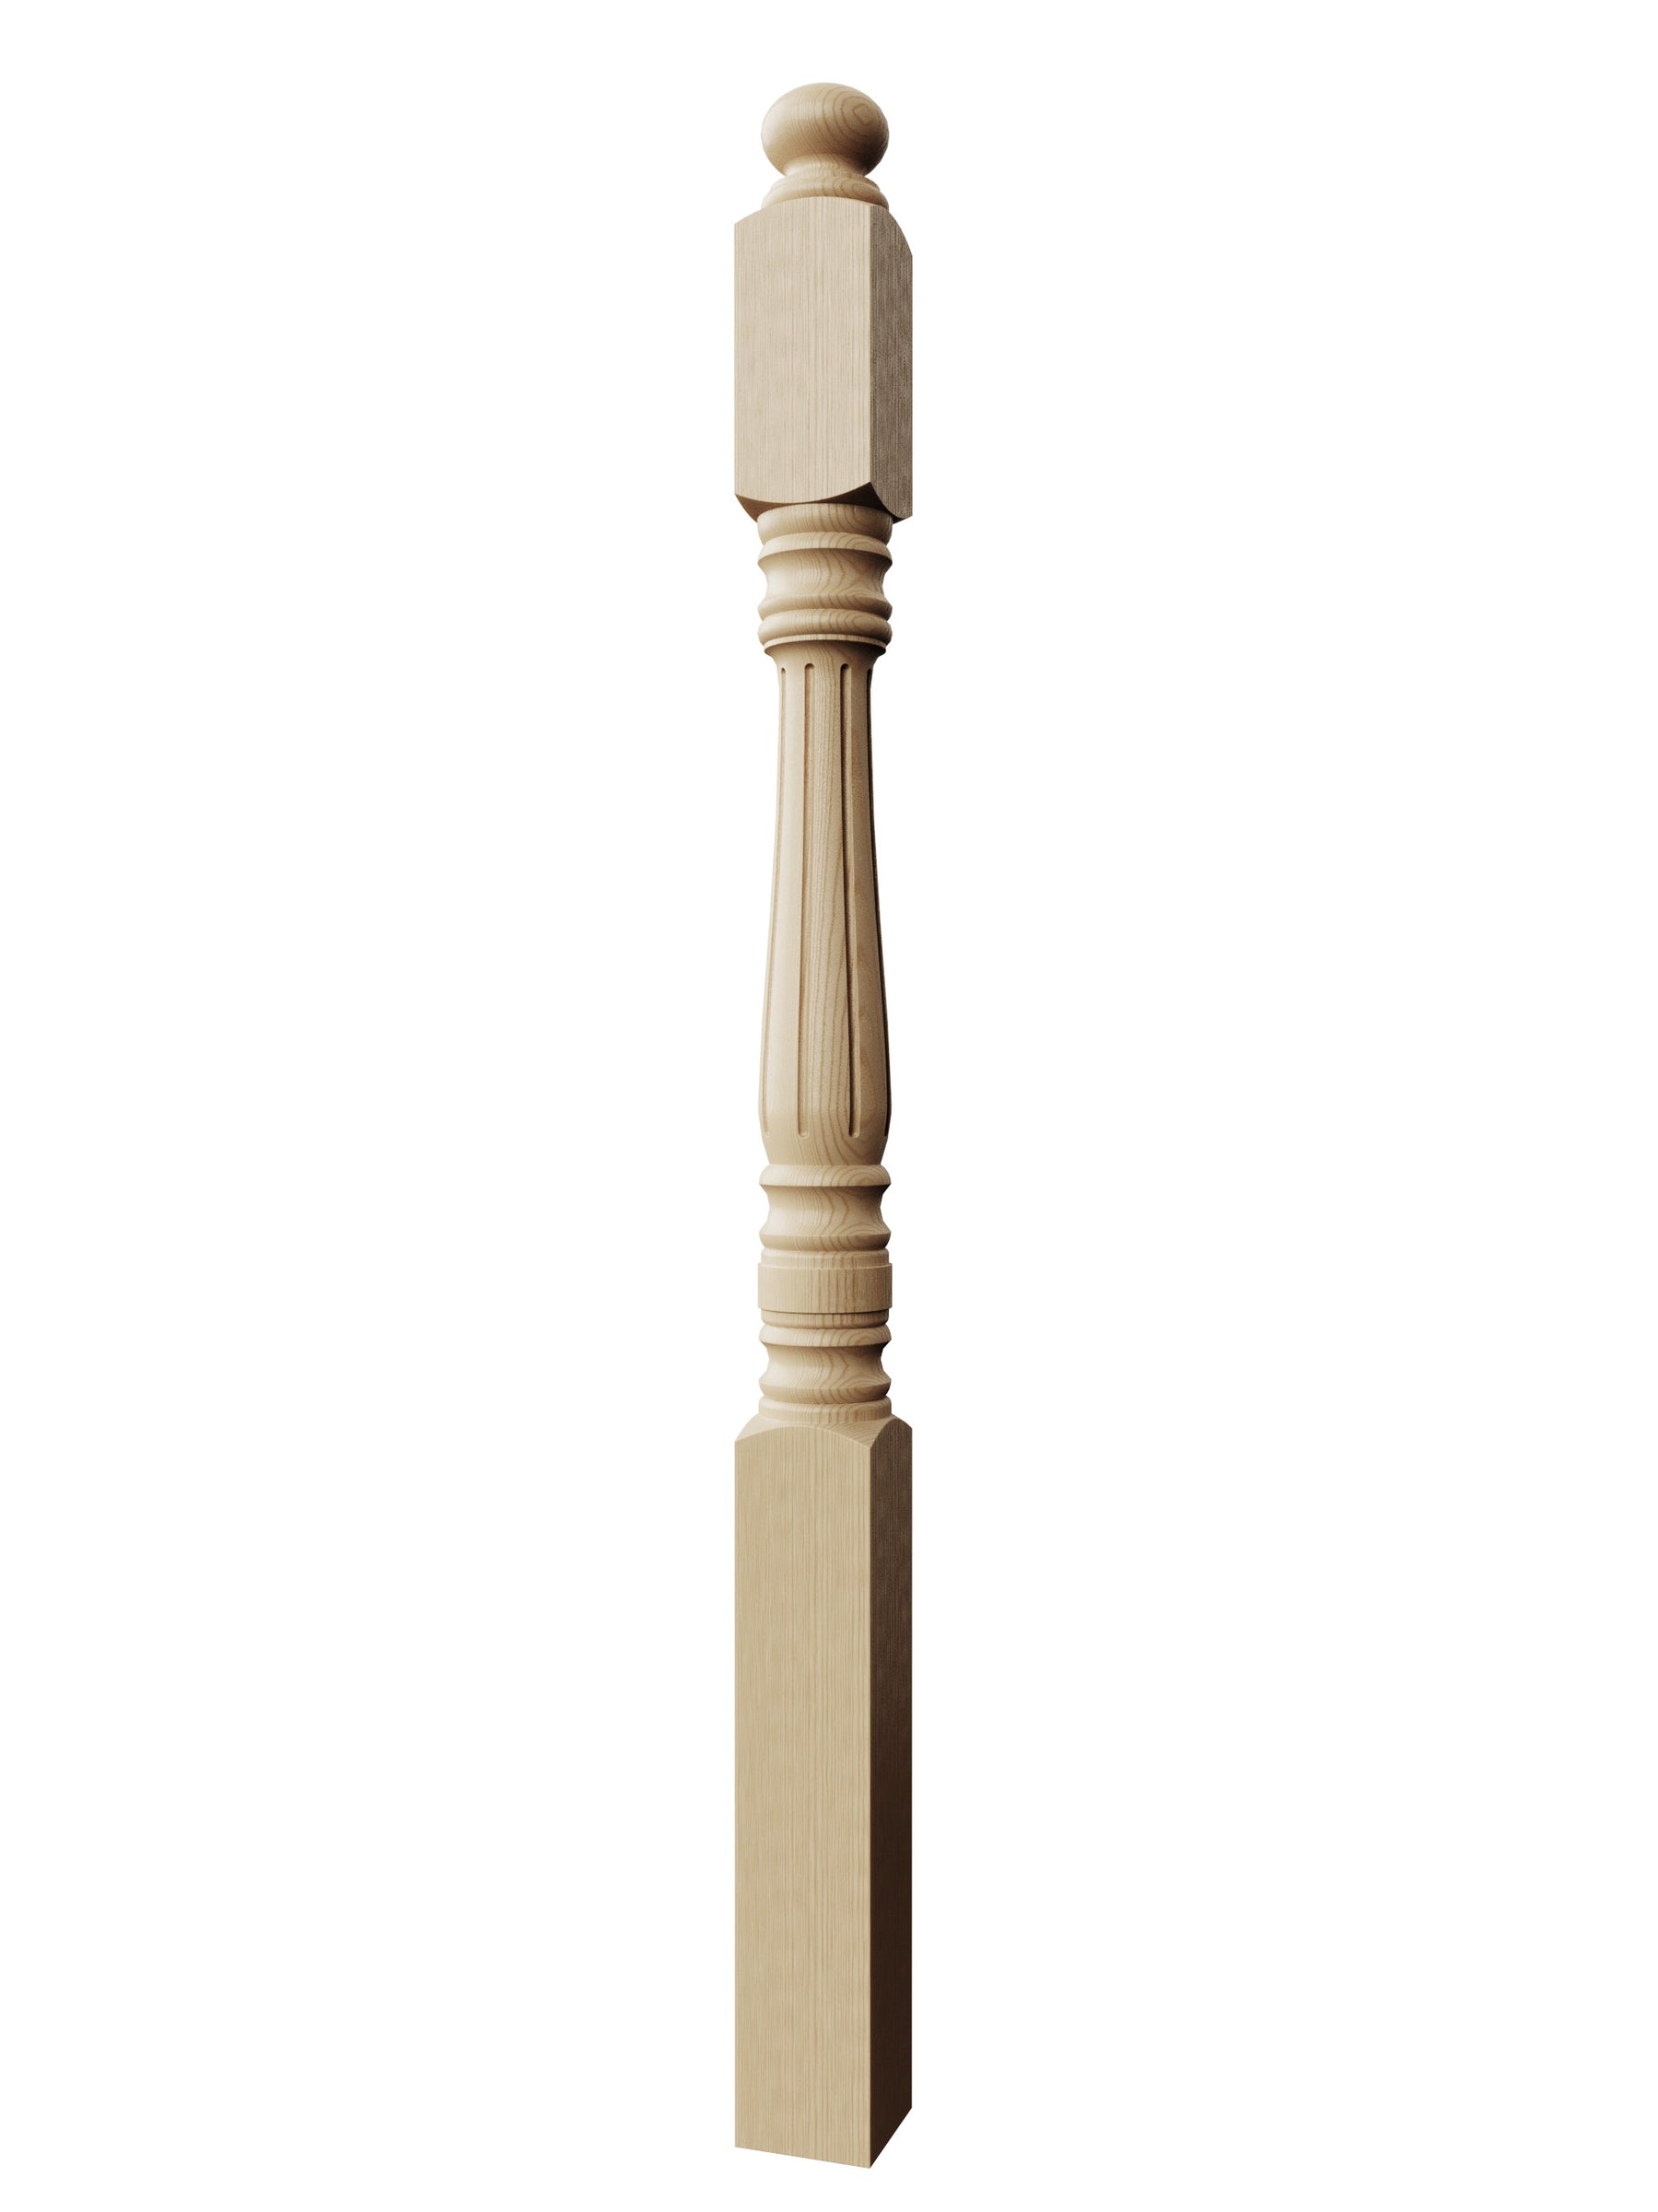 Williamsburg Post to Post Newel (Fluted)